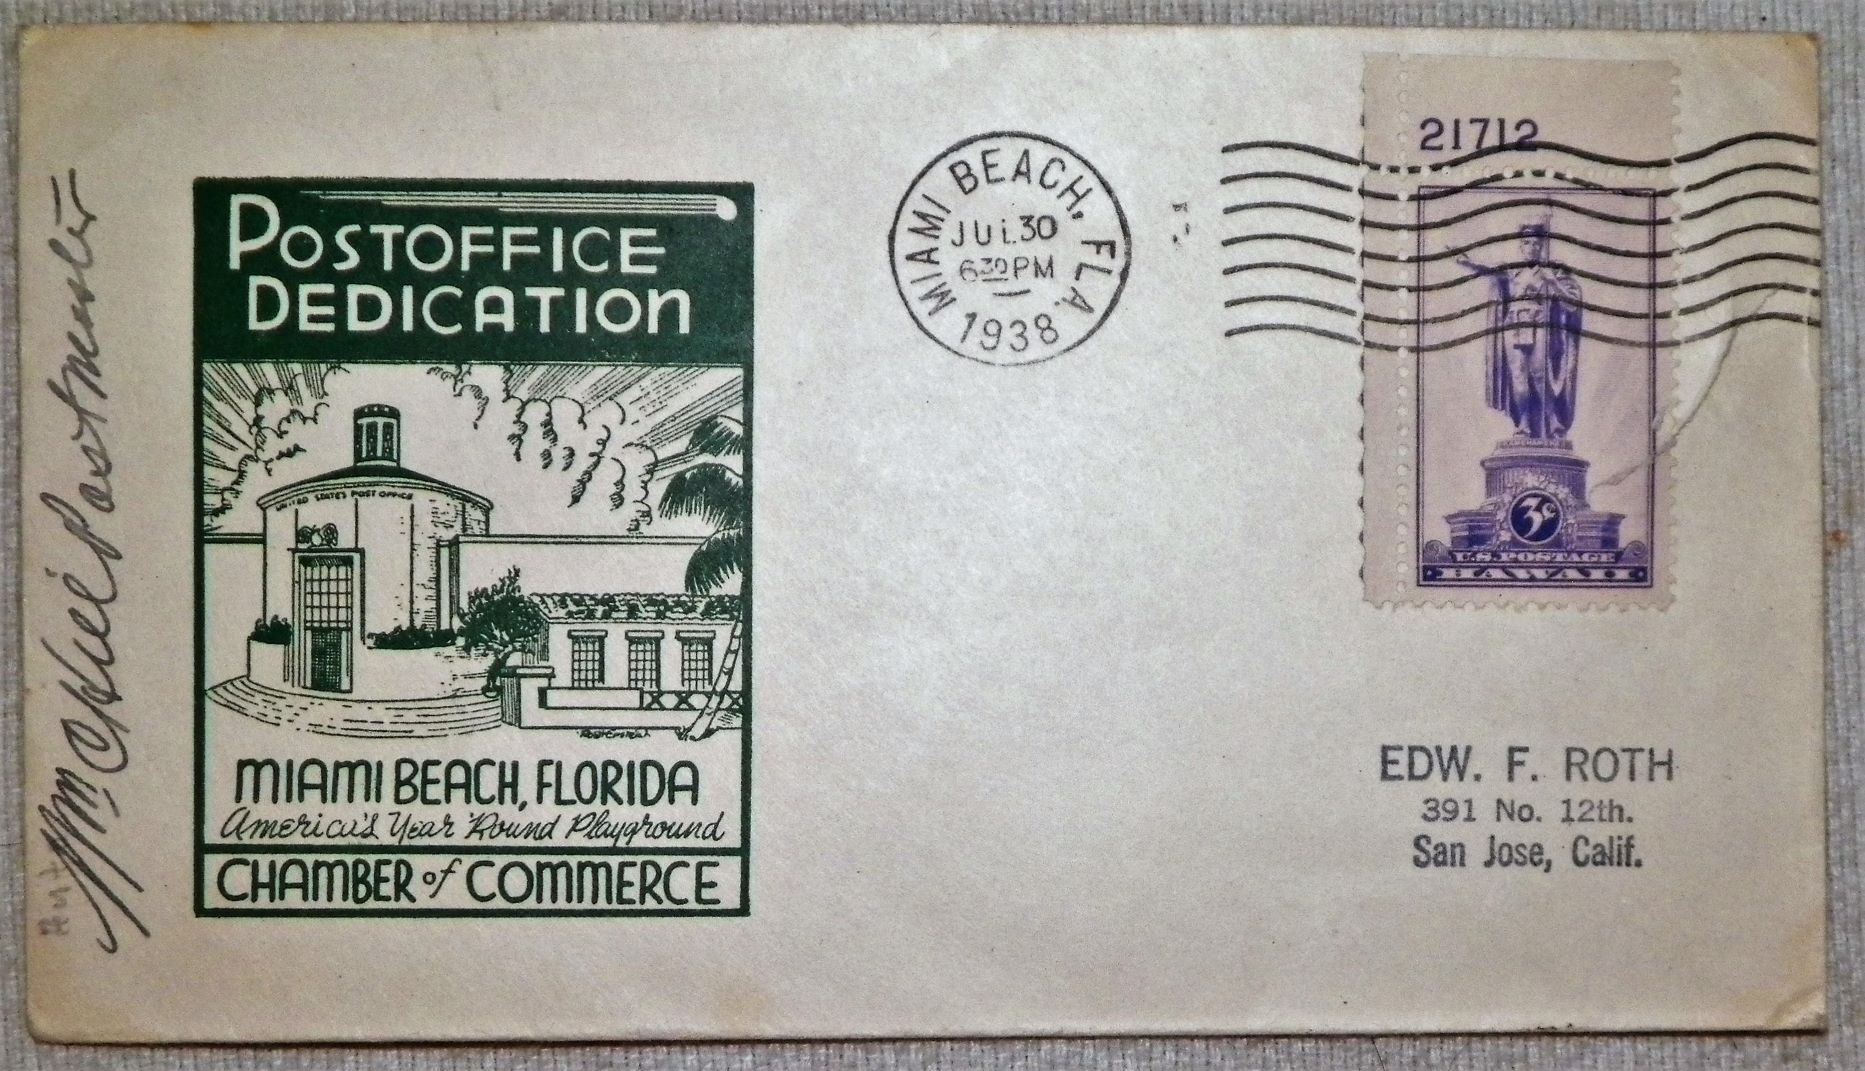 COLLECTIBLE MAIL POST OFFICE ENVELOPE MIAMI BEACH 1AA.JPG